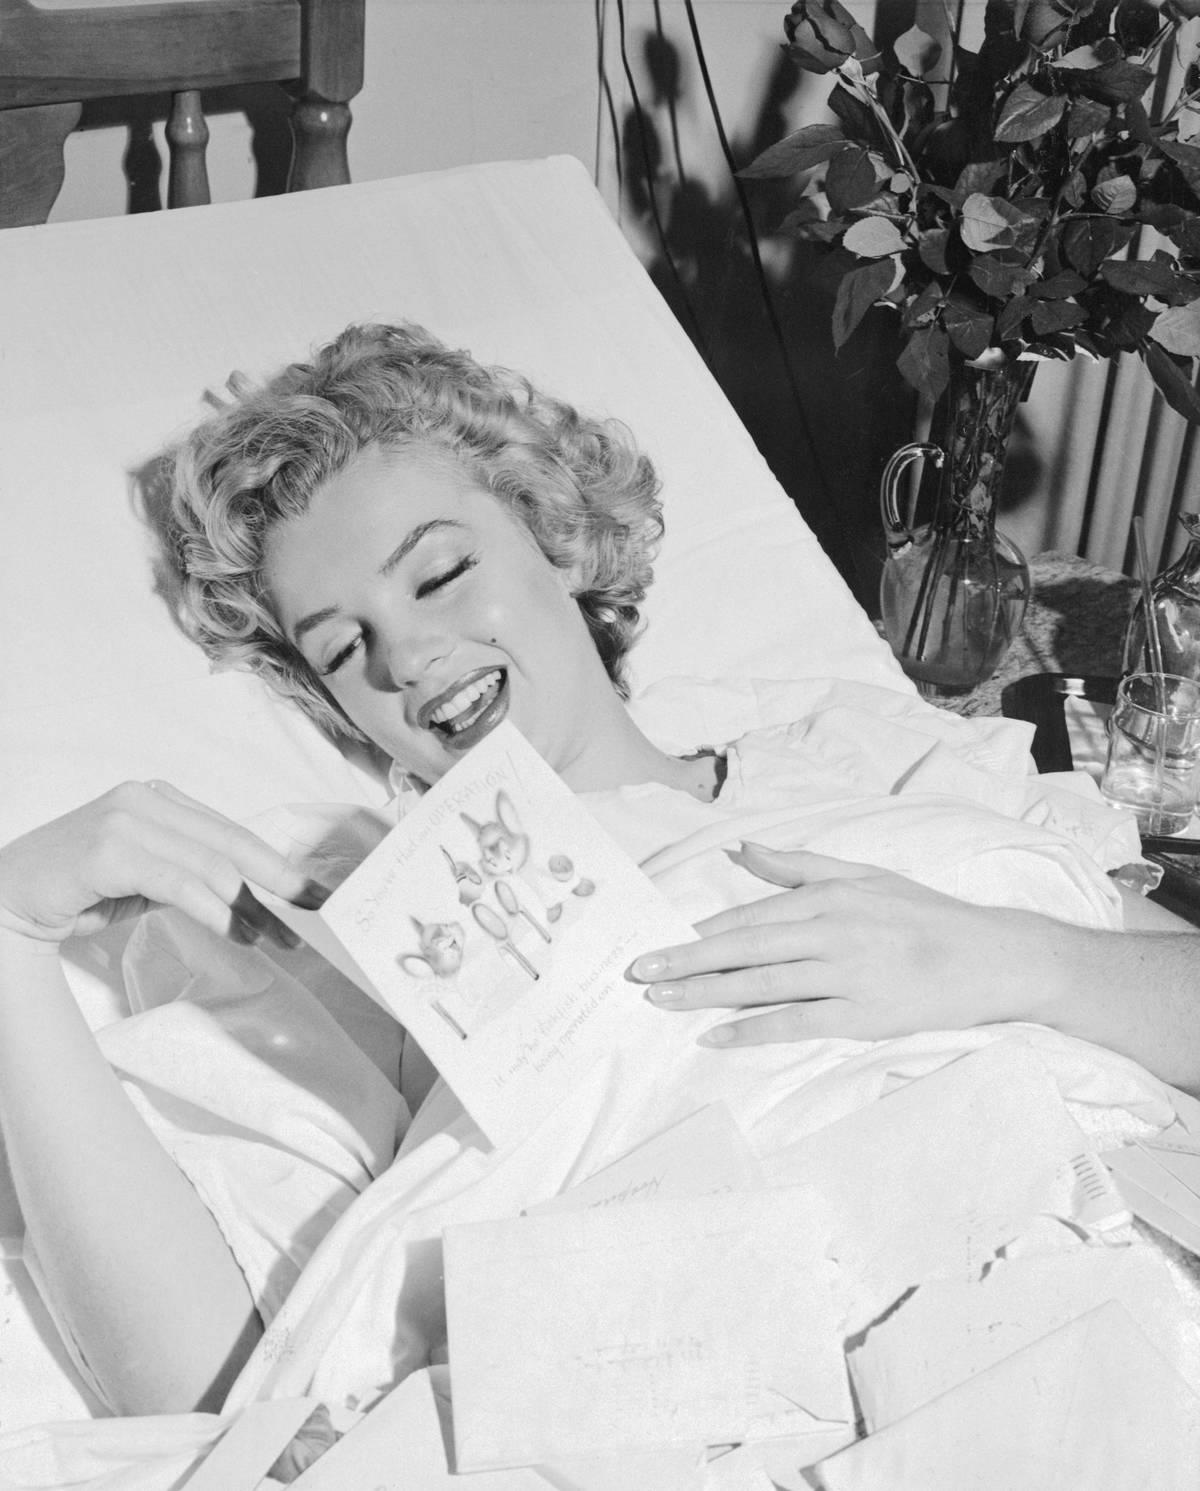 <p>From 1954 to 1955, actress and model Marilyn Monroe was connected to Yankee superstar Joe DiMaggio. They had a brief but epic romance which is seen here, even though DiMaggio isn't in the photo.</p> <p>While lying in bed, Monroe is seen smiling as she reads a get-well card from the baseball player.</p>